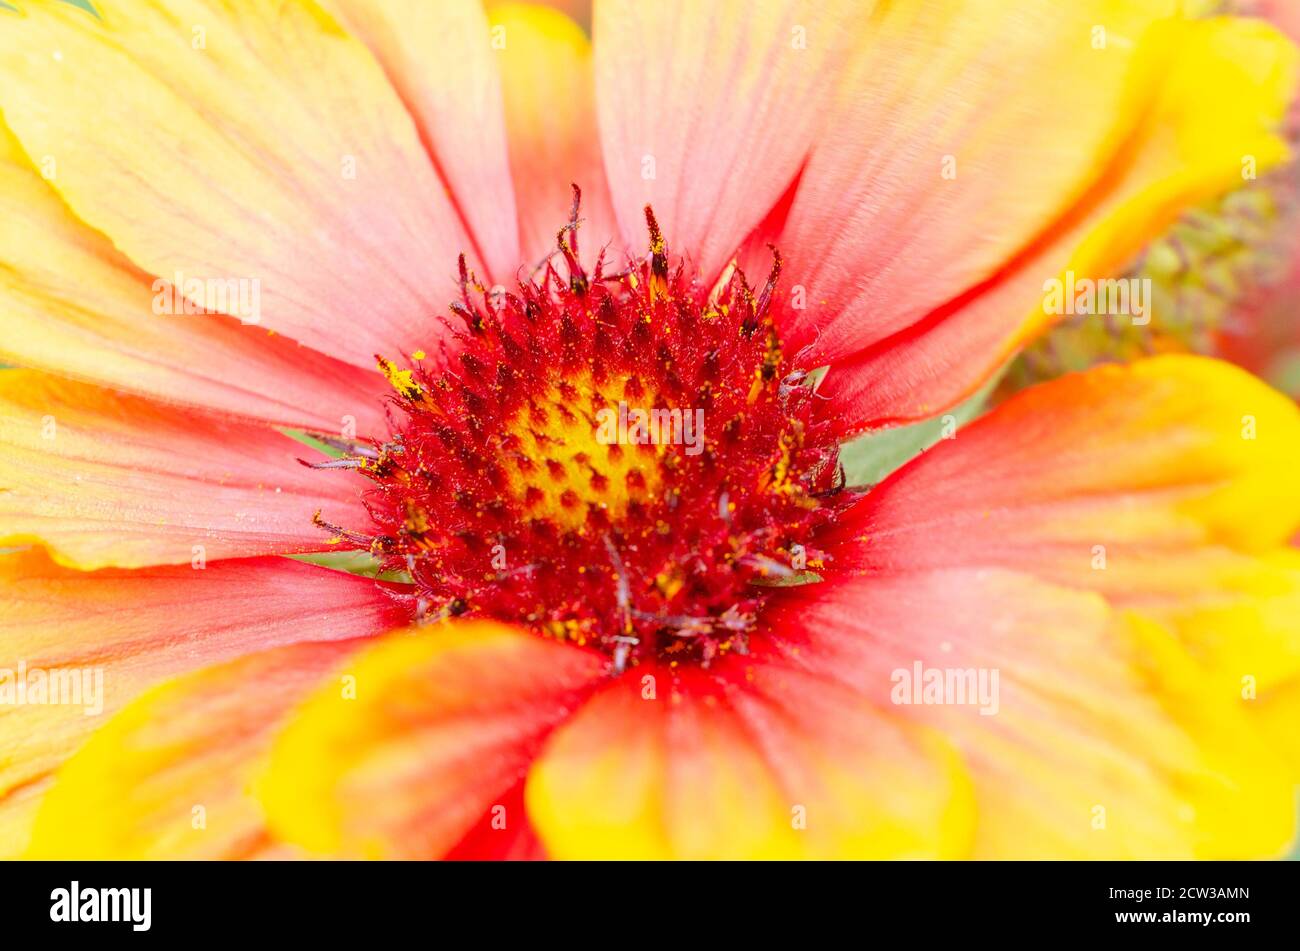 Close up view of a gaillardia flower with vibrant red and yellow colours Stock Photo